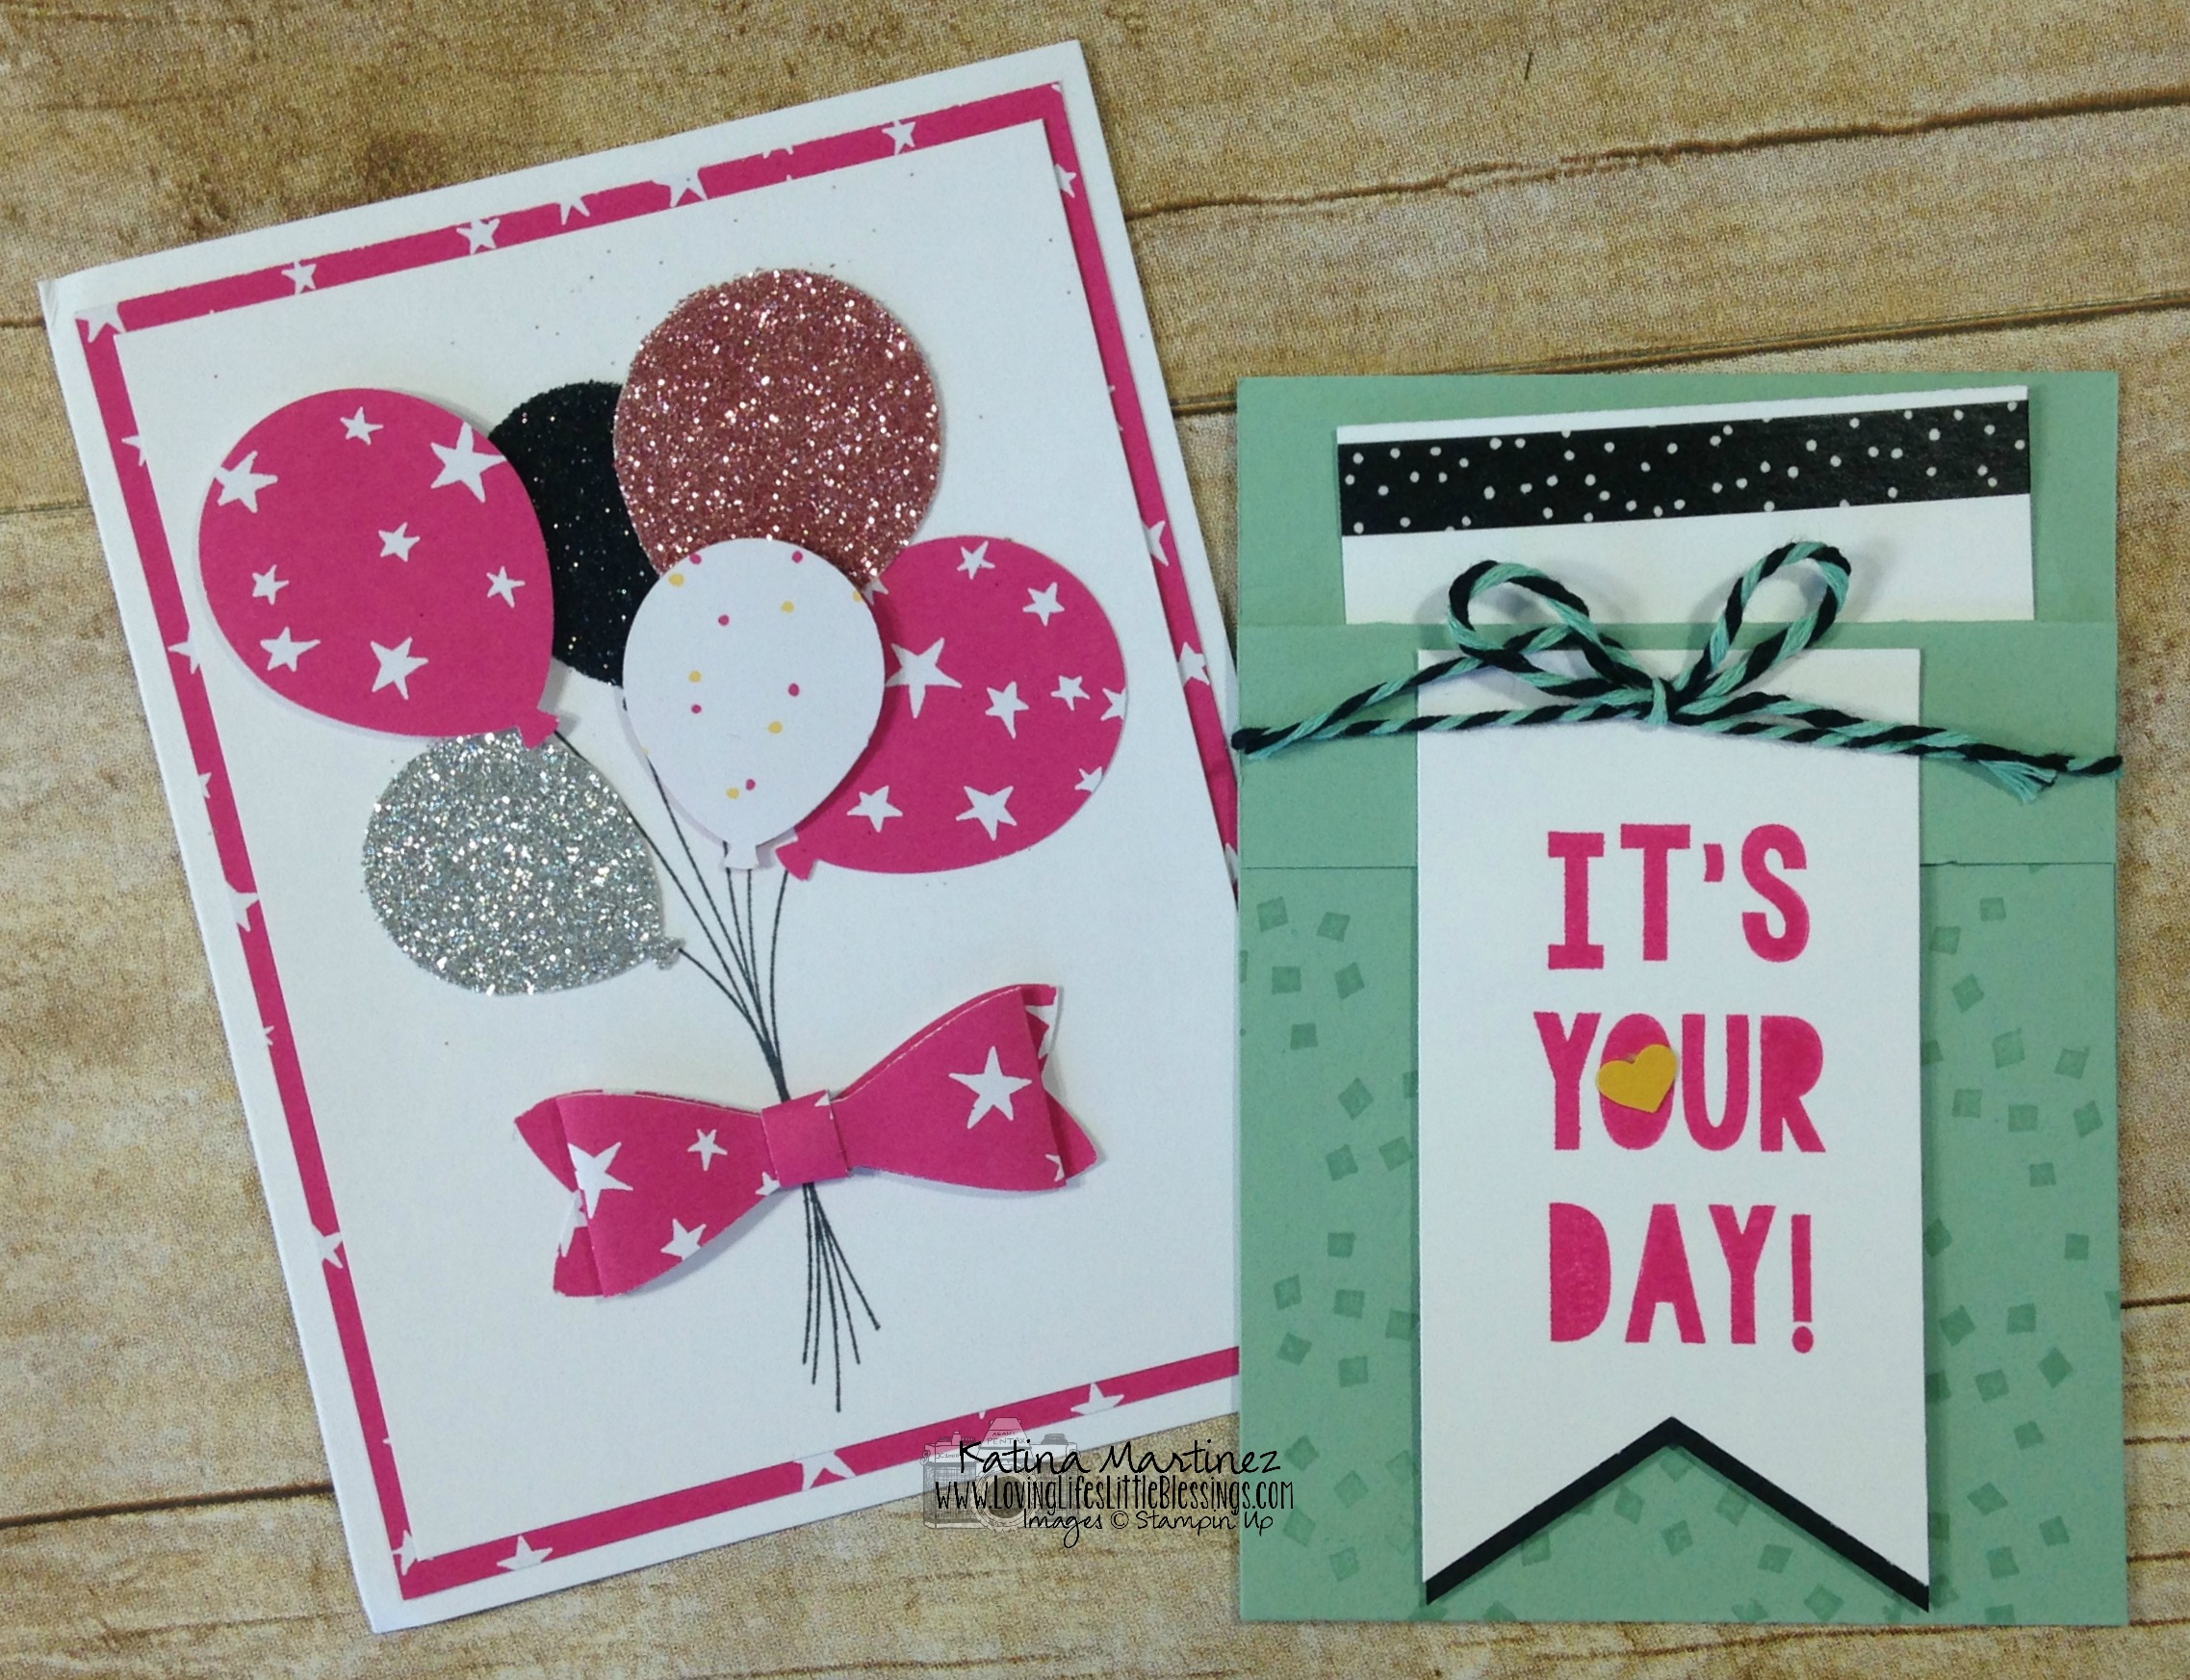 Handmade Birthday Card Ideas For Husband Happy Birthday Cards And Gifts Loving Lifes Little Blessings